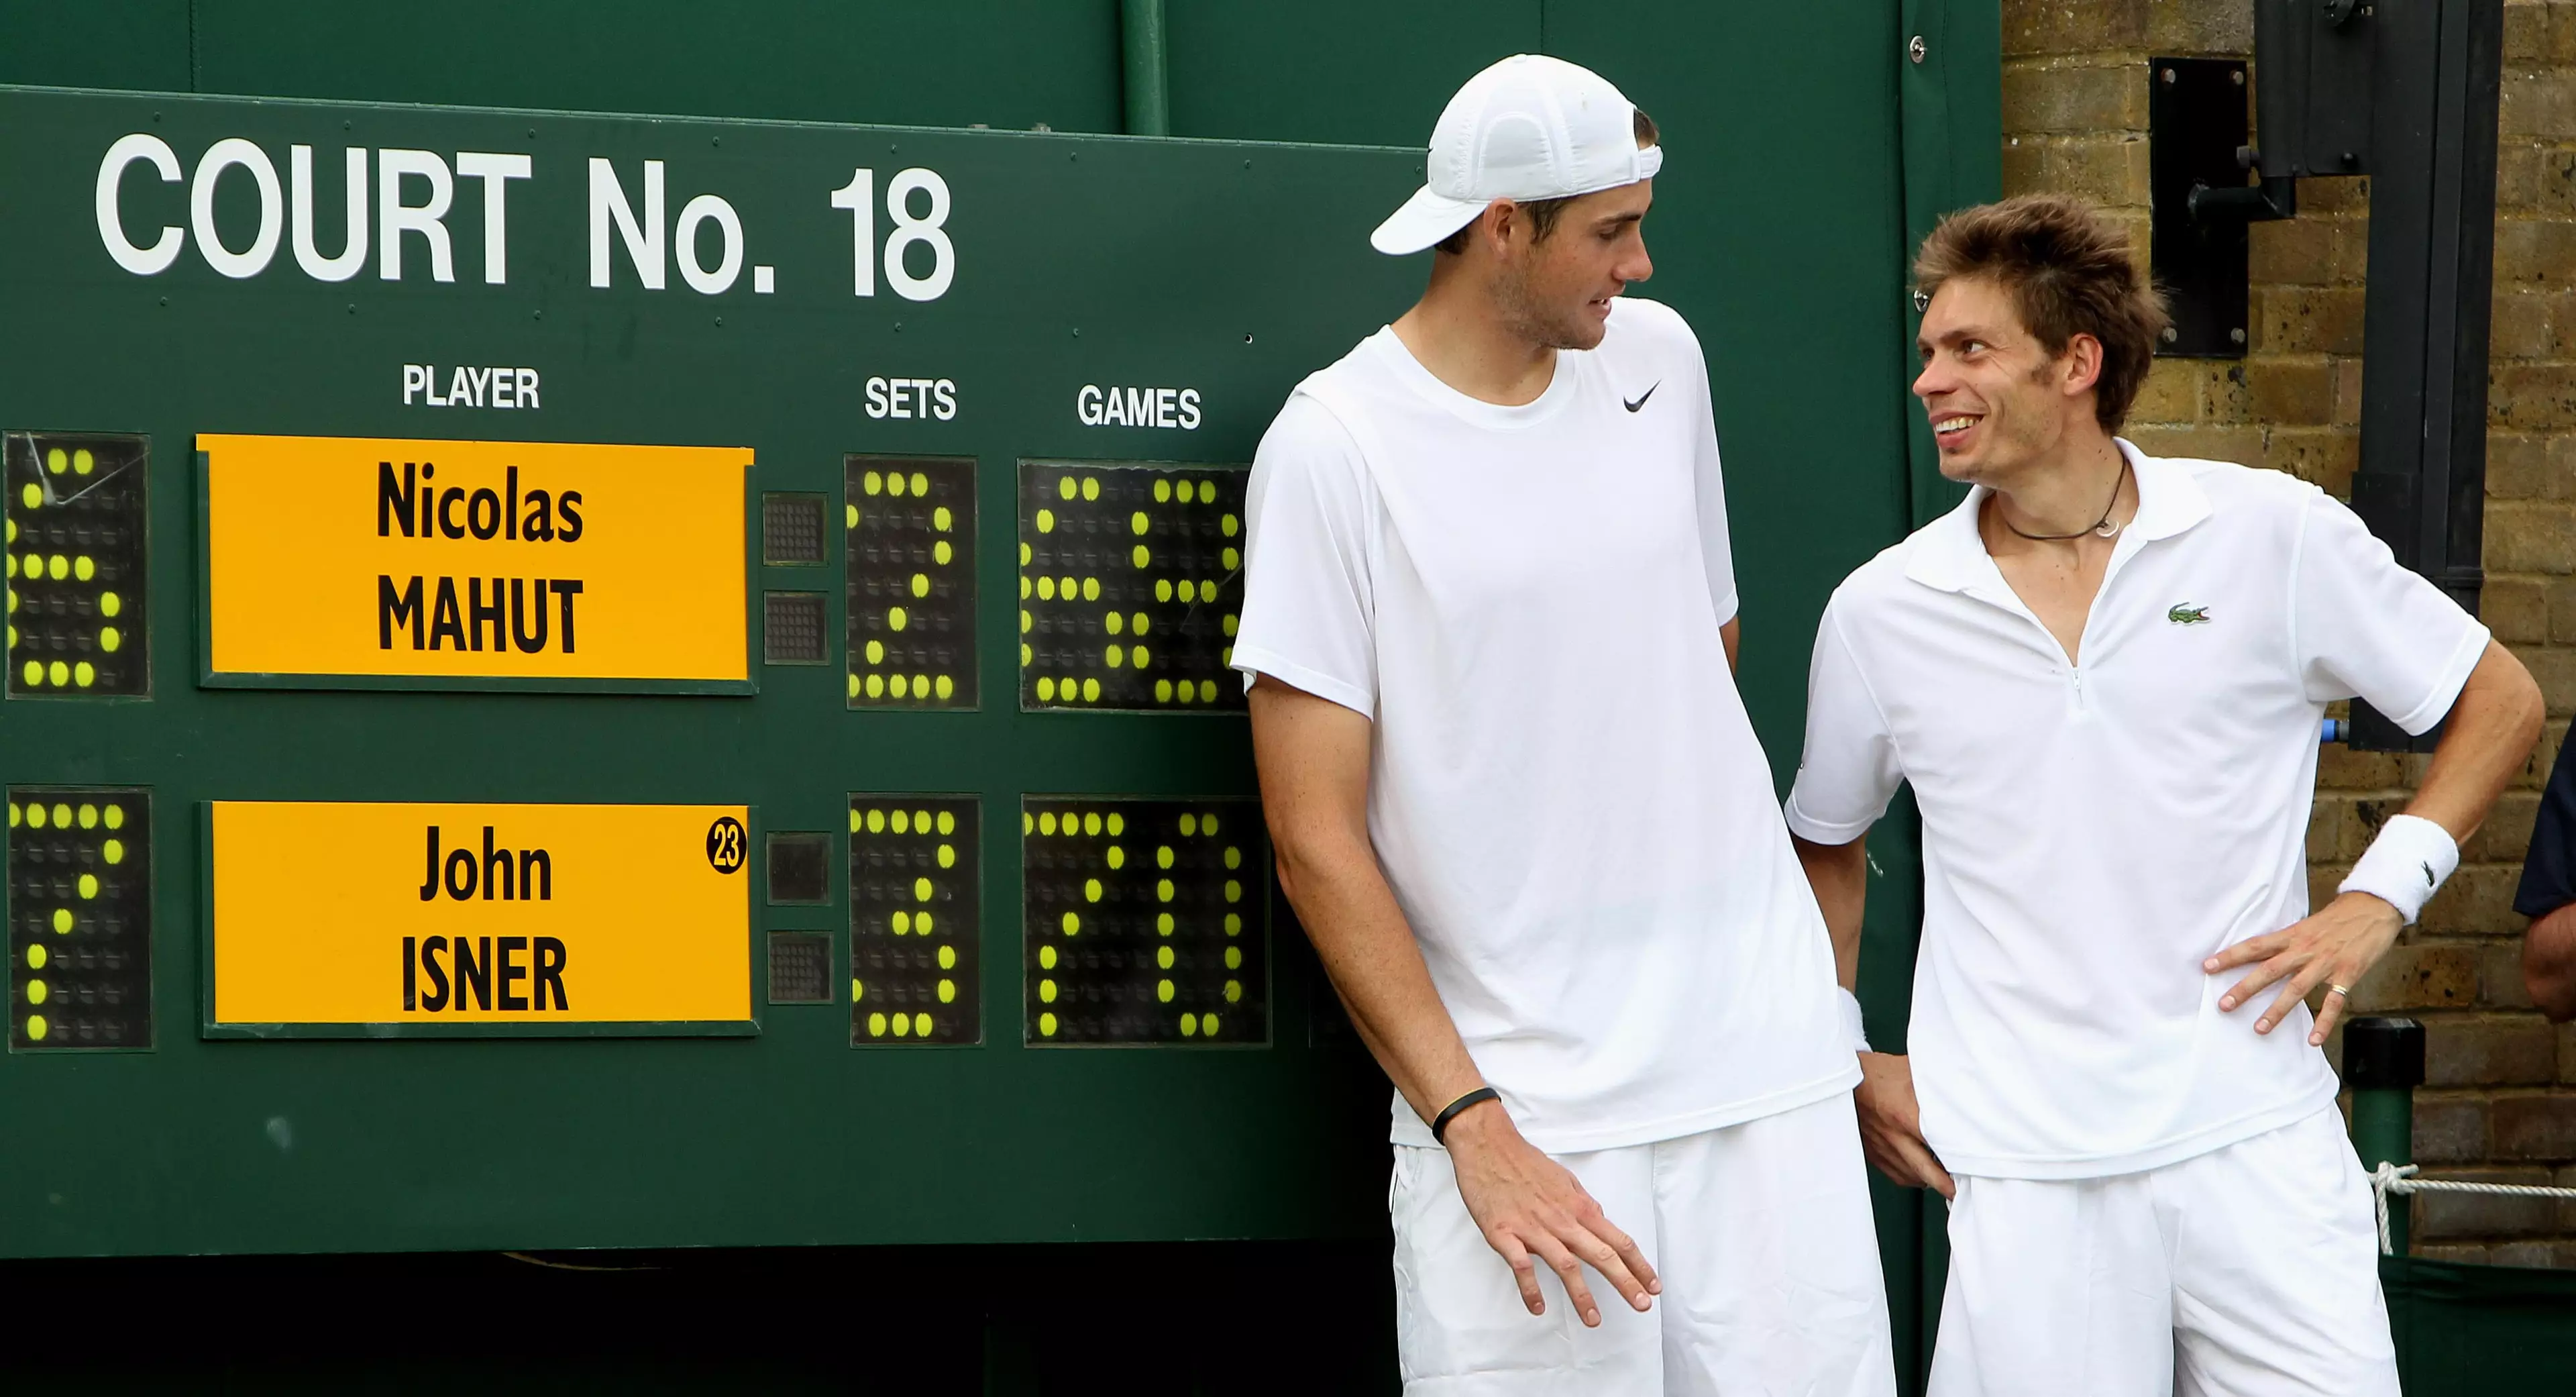 The two men standing by the scoreboard after the incredible match. Image: PA Images